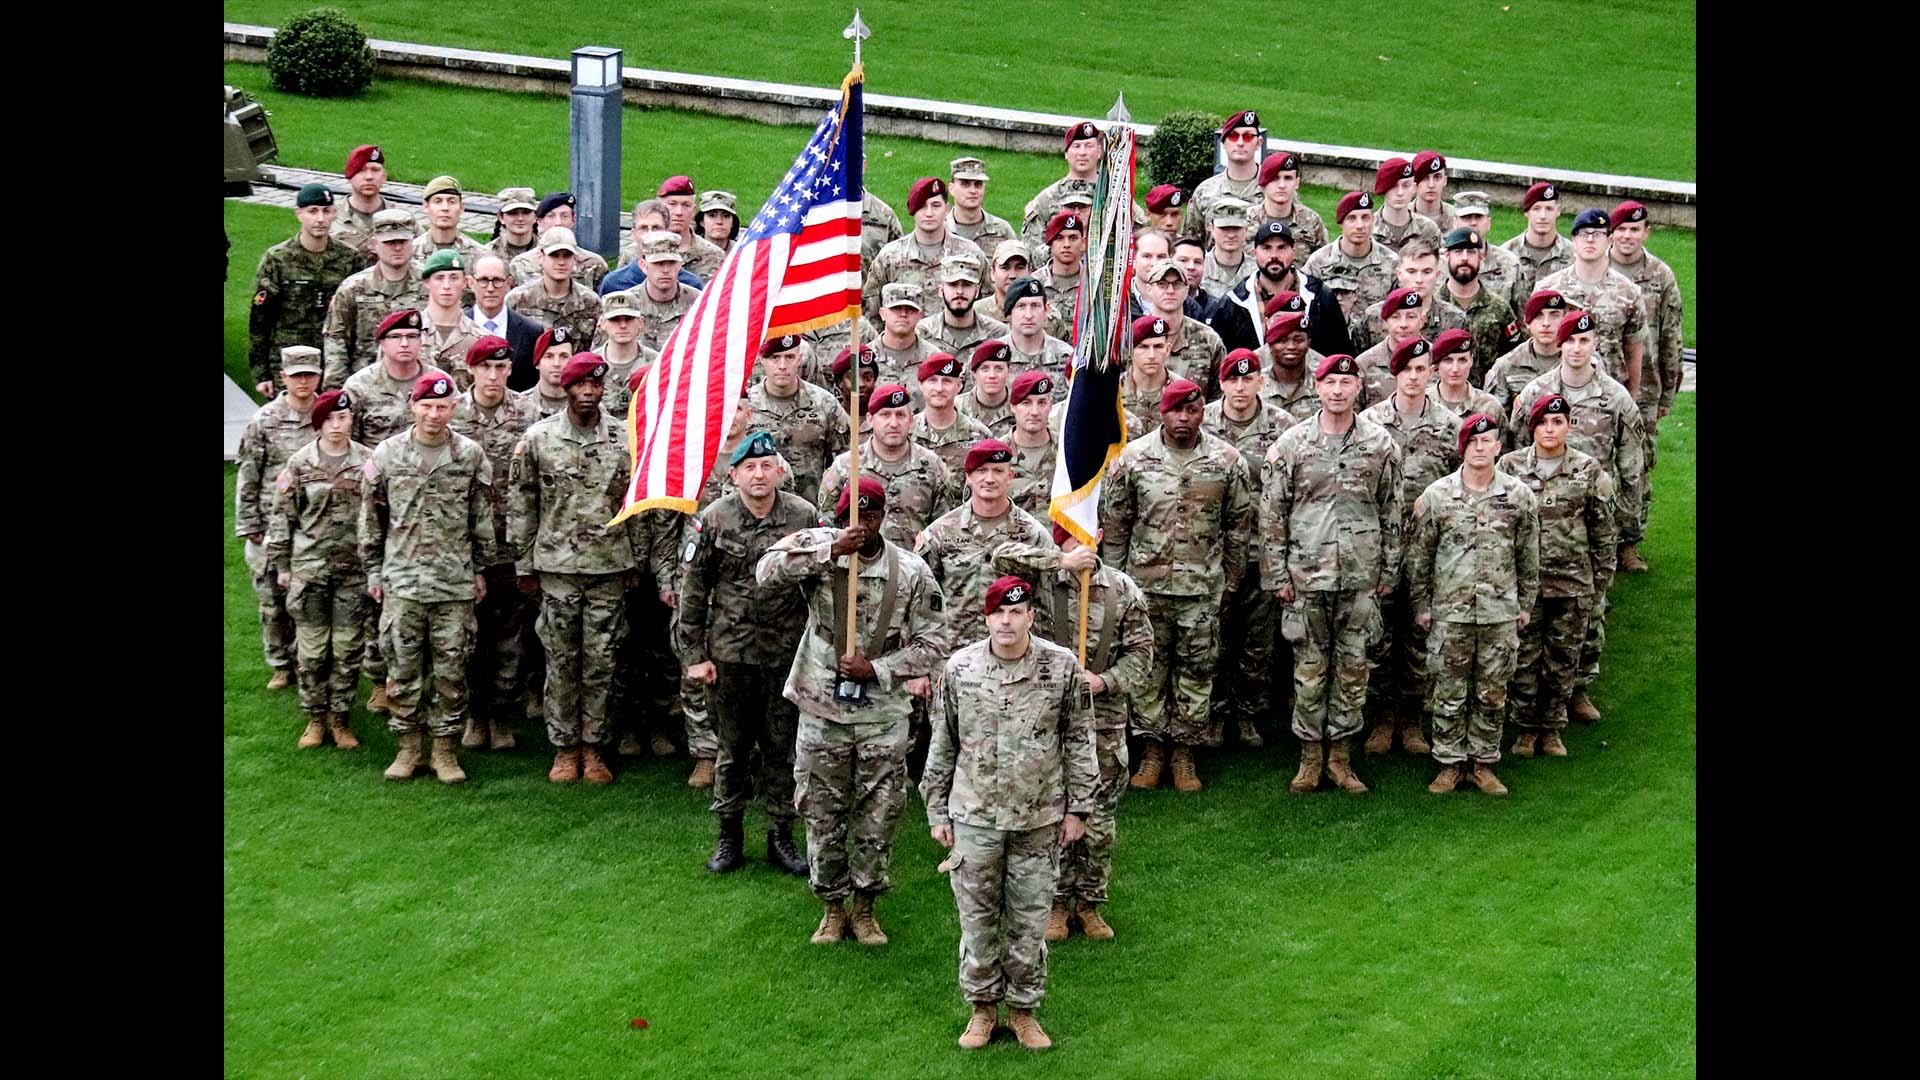 The 18th Airborne Corps staff, led by Lt. Gen. Christopher Donahue and Command Sgt. Maj. T.J. Holland, gather in front of the Joint Task Force - Dragon Headquarters in Wiesbaden, Germany, on Oct. 21, 2022, to commemorate the completion of the command's nine-month deployment to Europe. US Army photo by Lt. Col. David Olson.